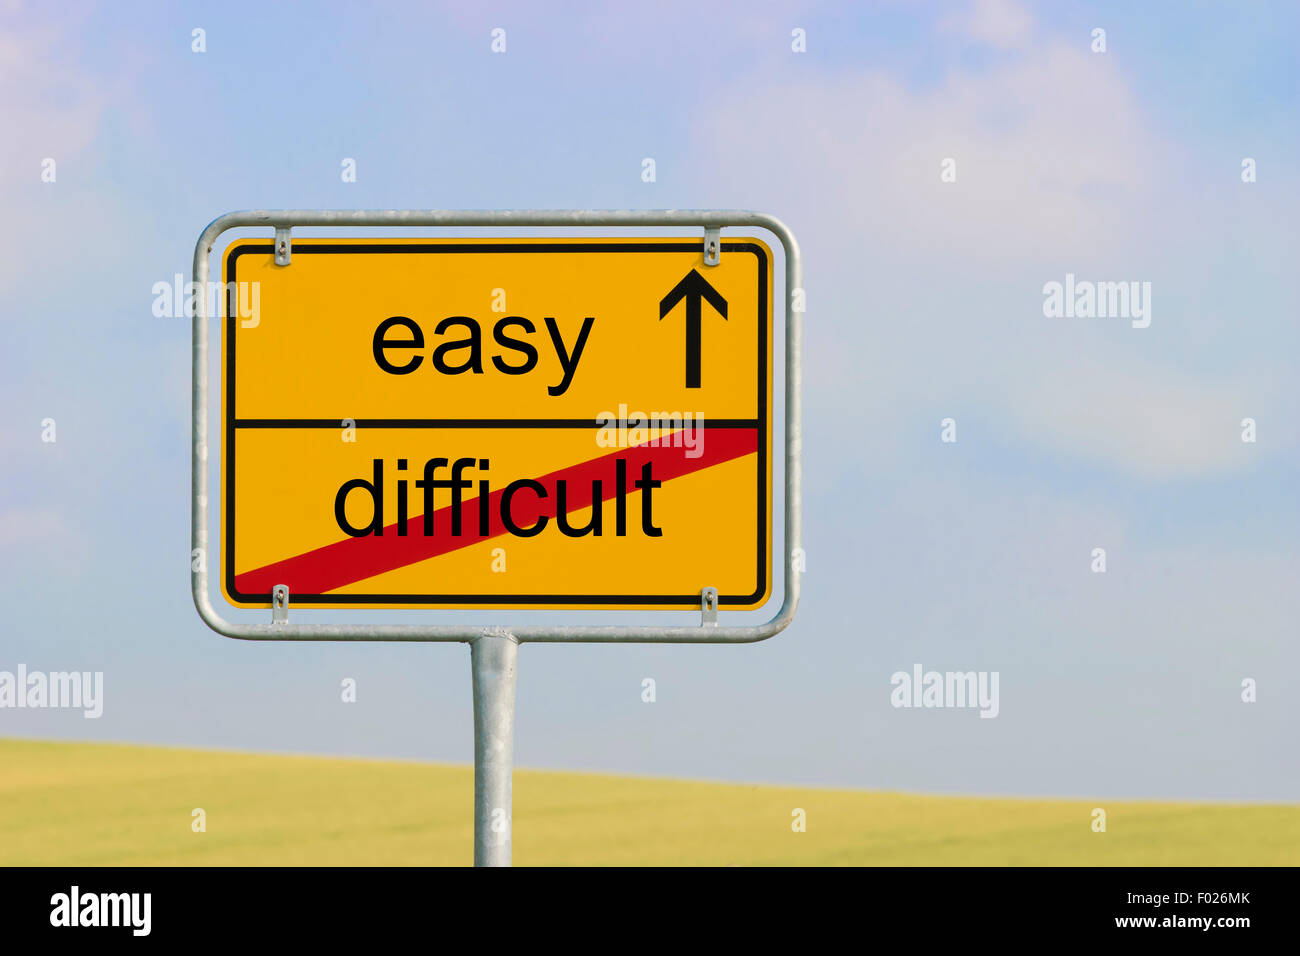 Yellow town sign with text 'difficult easy' Stock Photo